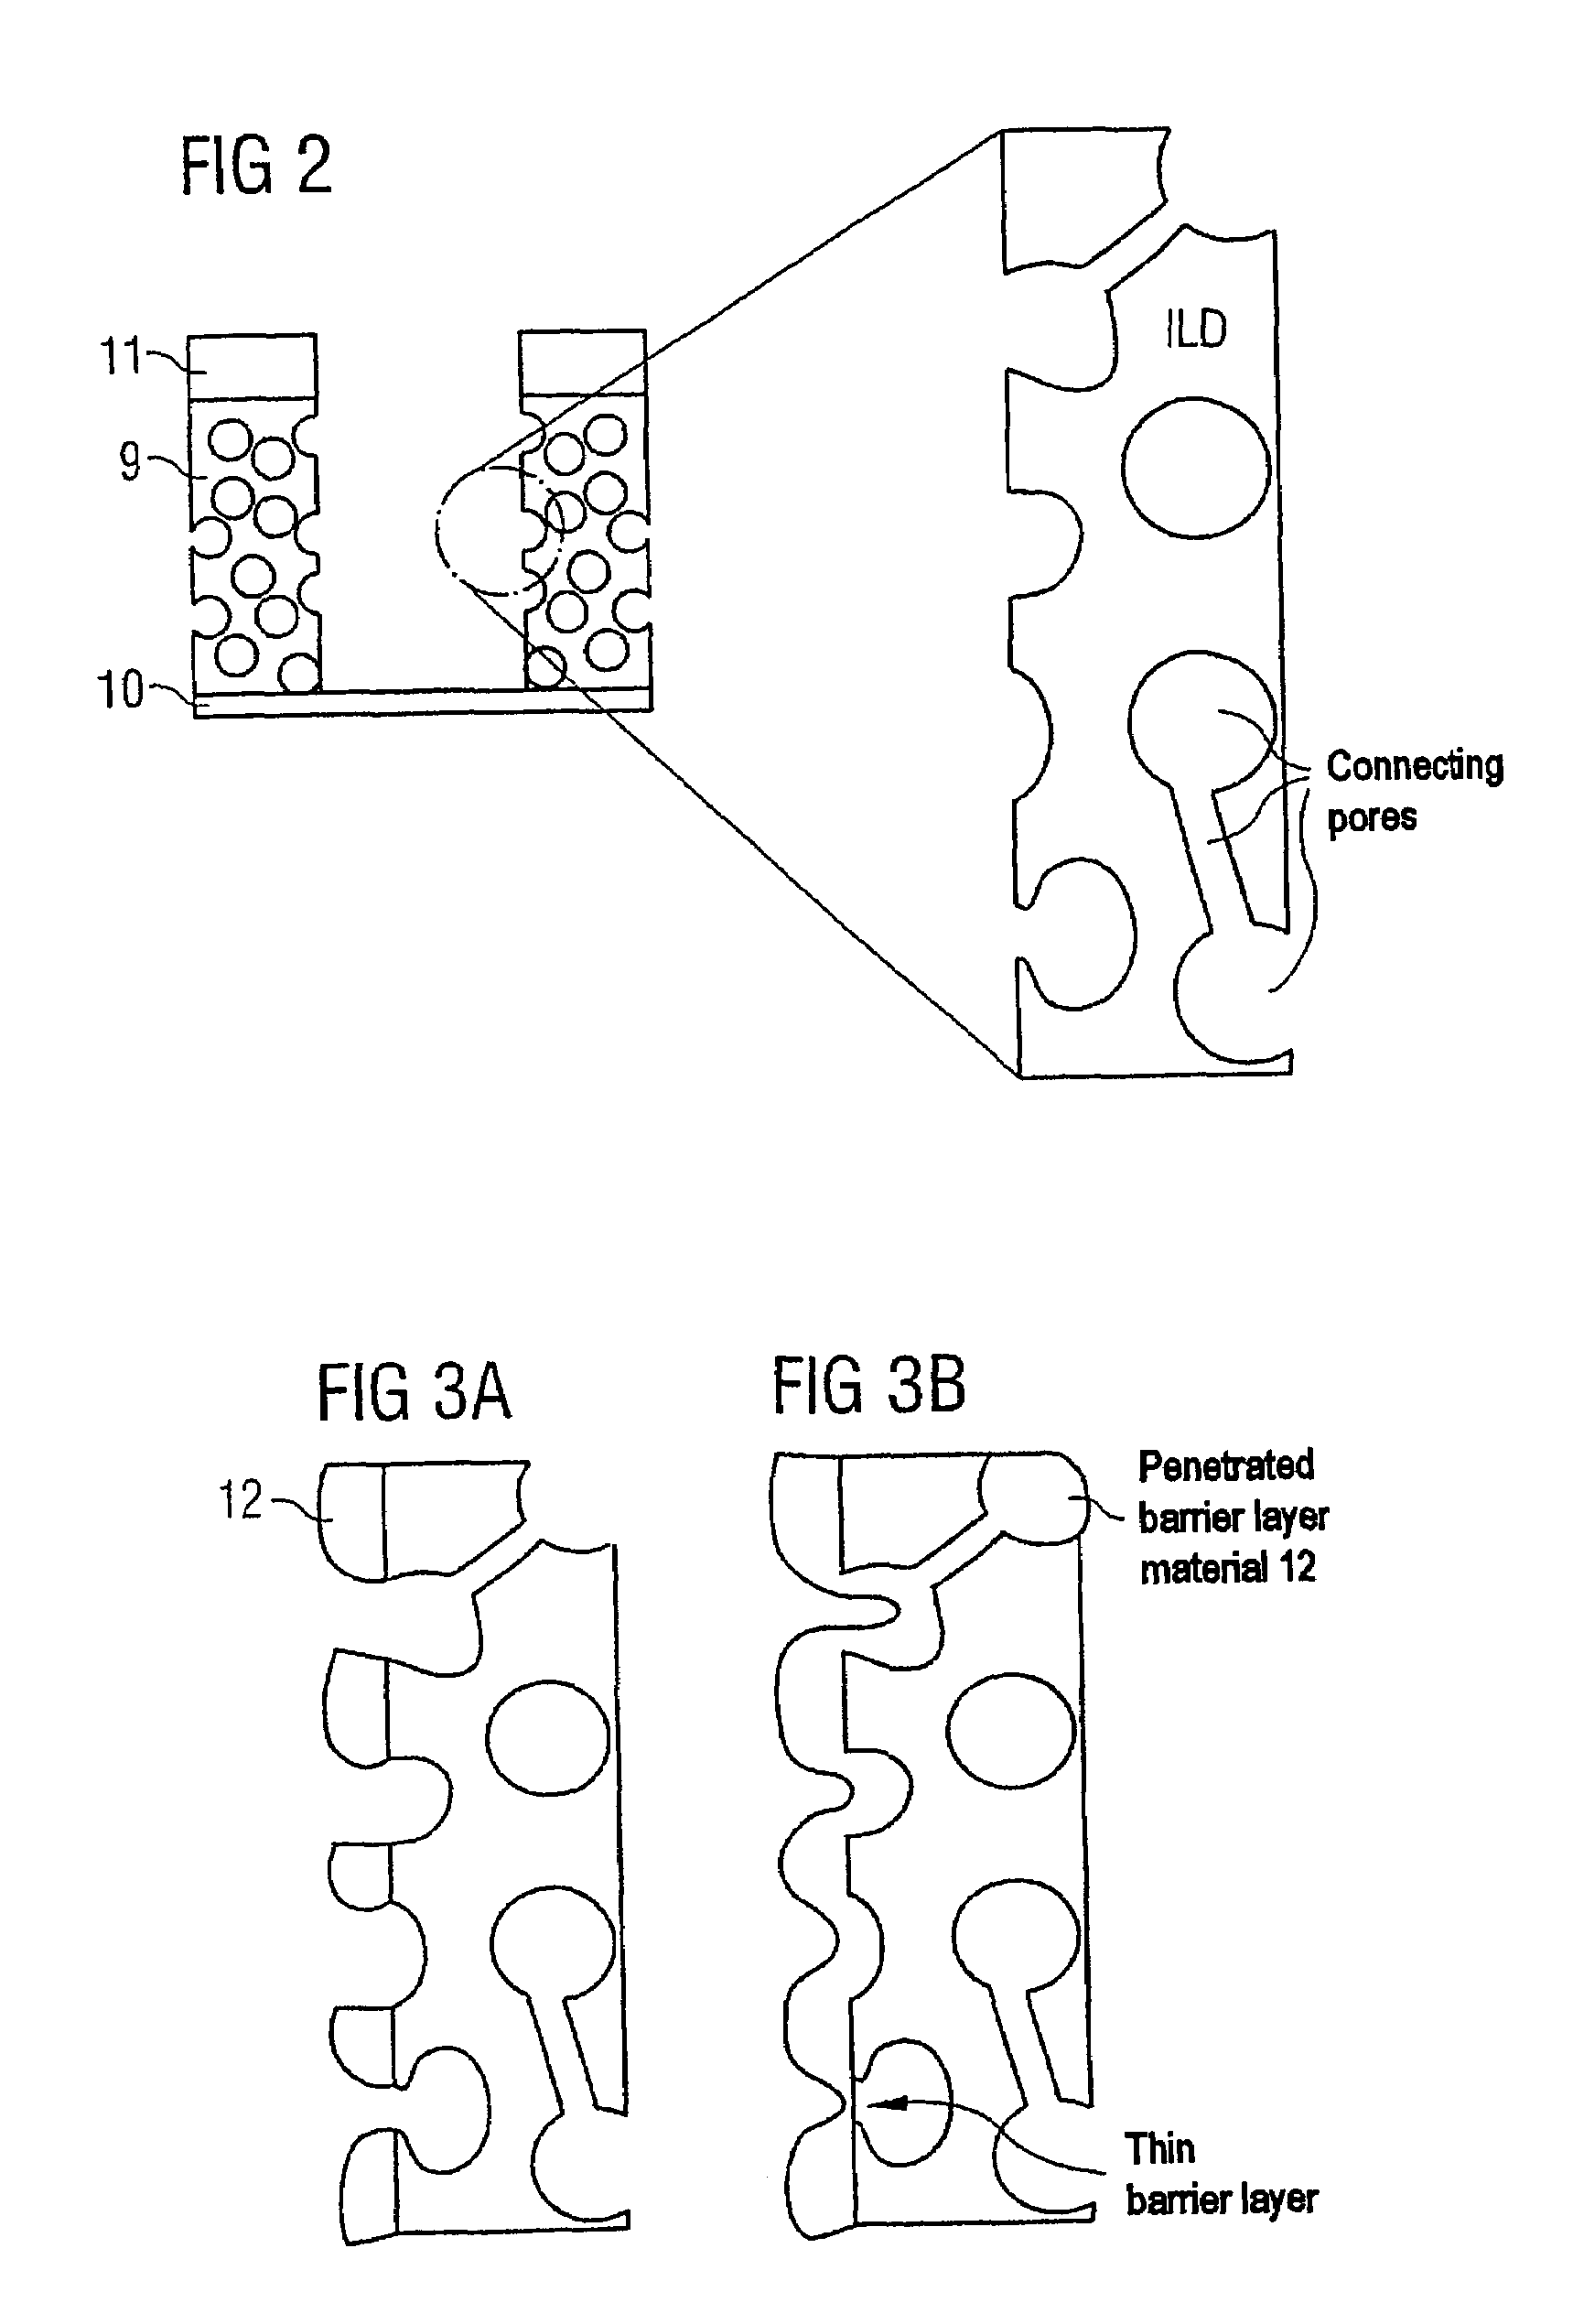 Polymer for sealing porous materials during chip production